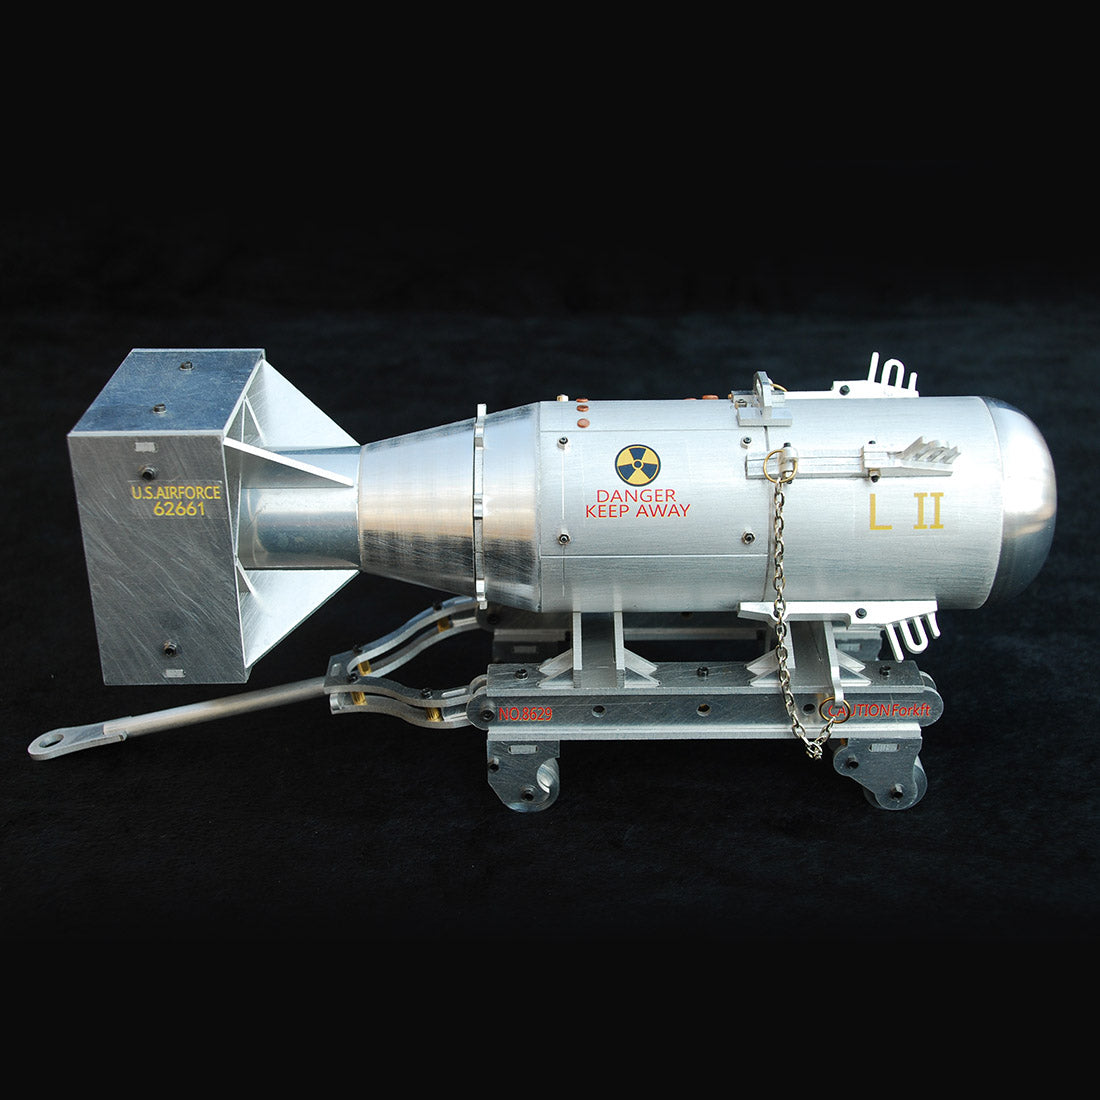 WWII 1/12 Scale Atomic Bomb 3D Metal Model Military Assembly Toy